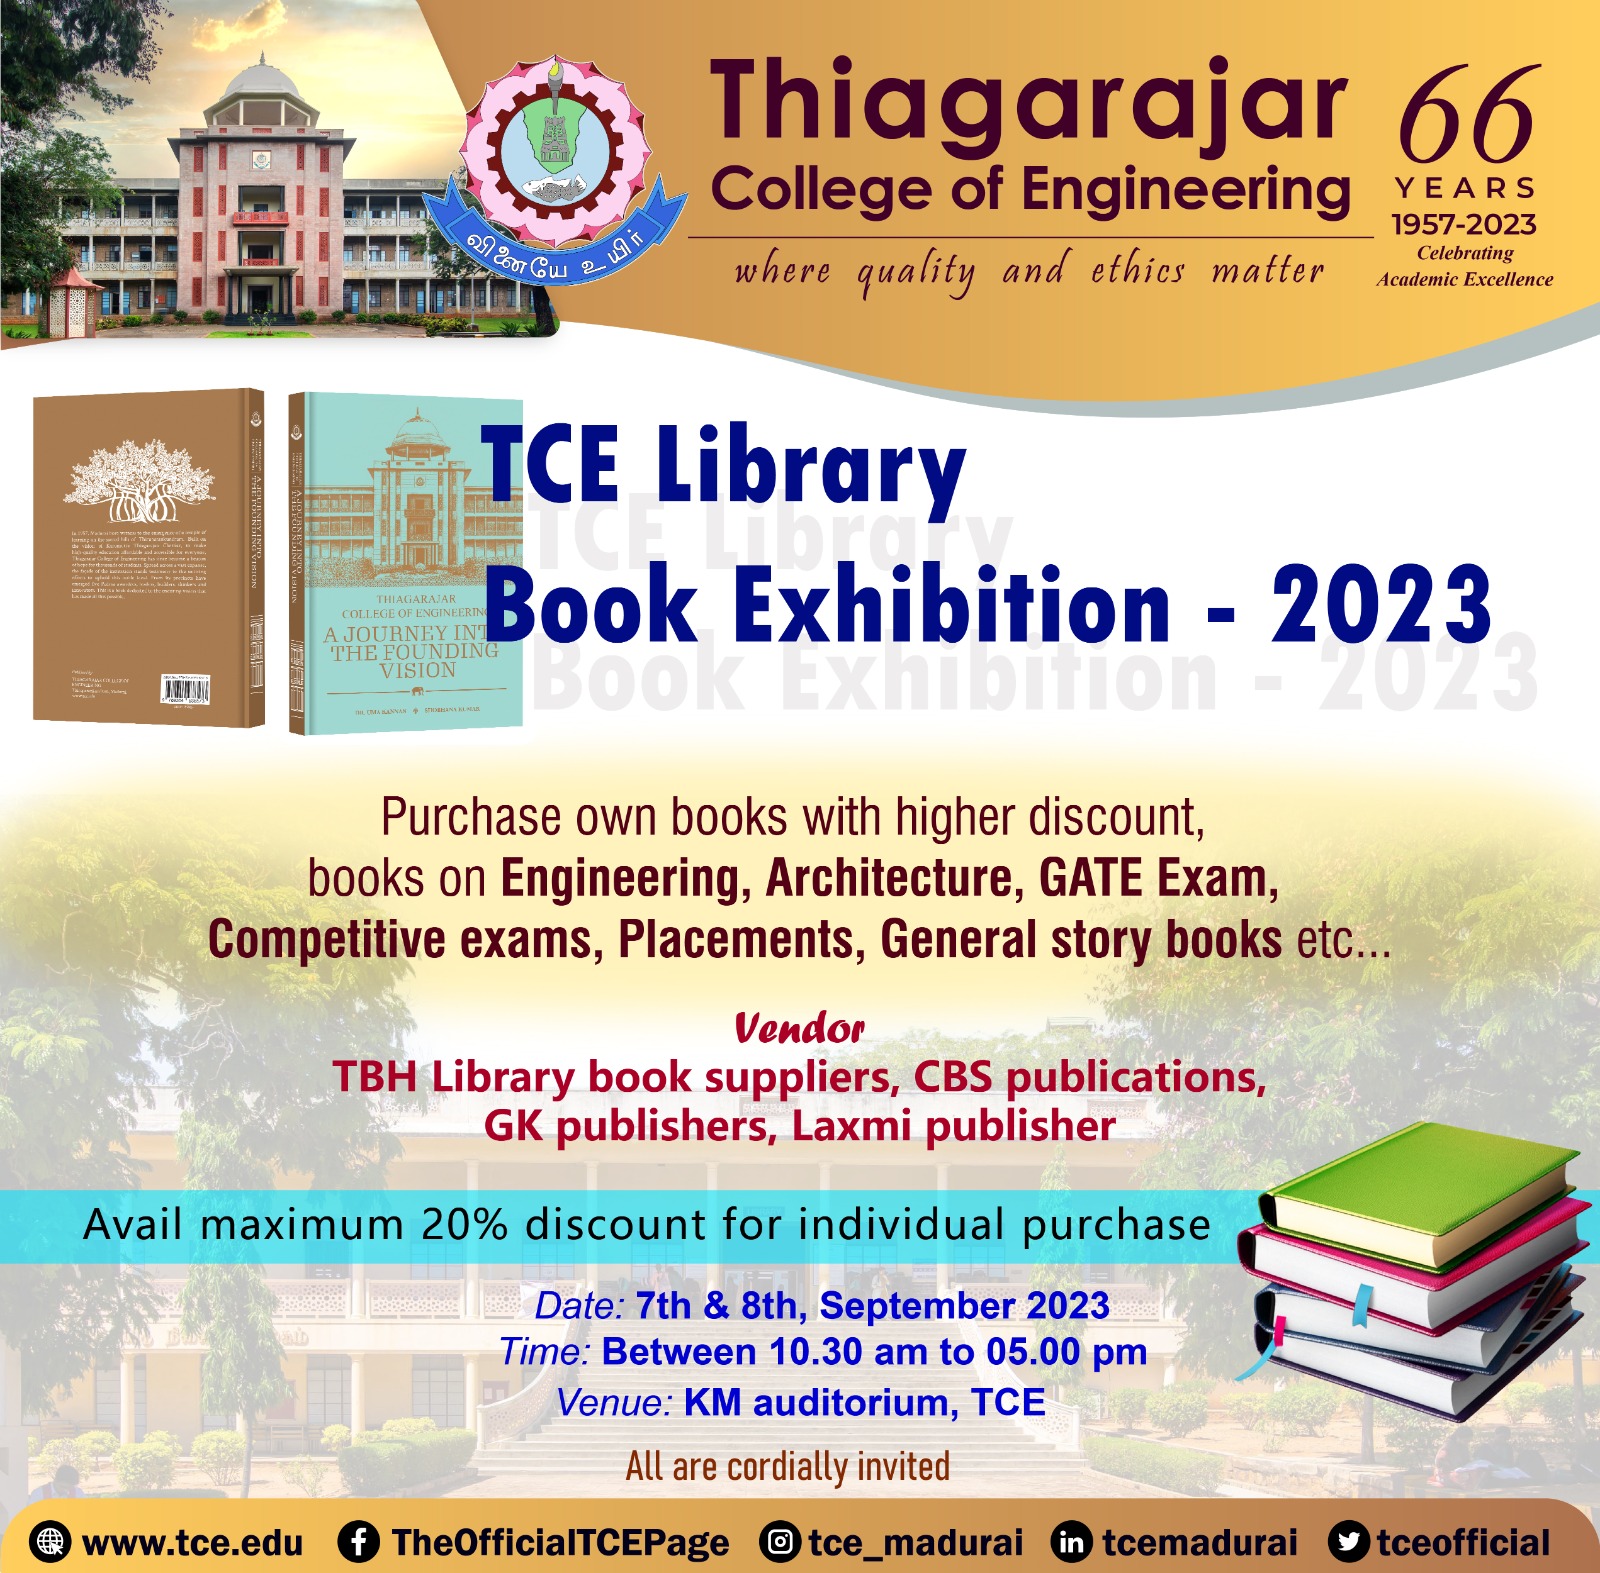 TCE Library Book Exhibition - 2023